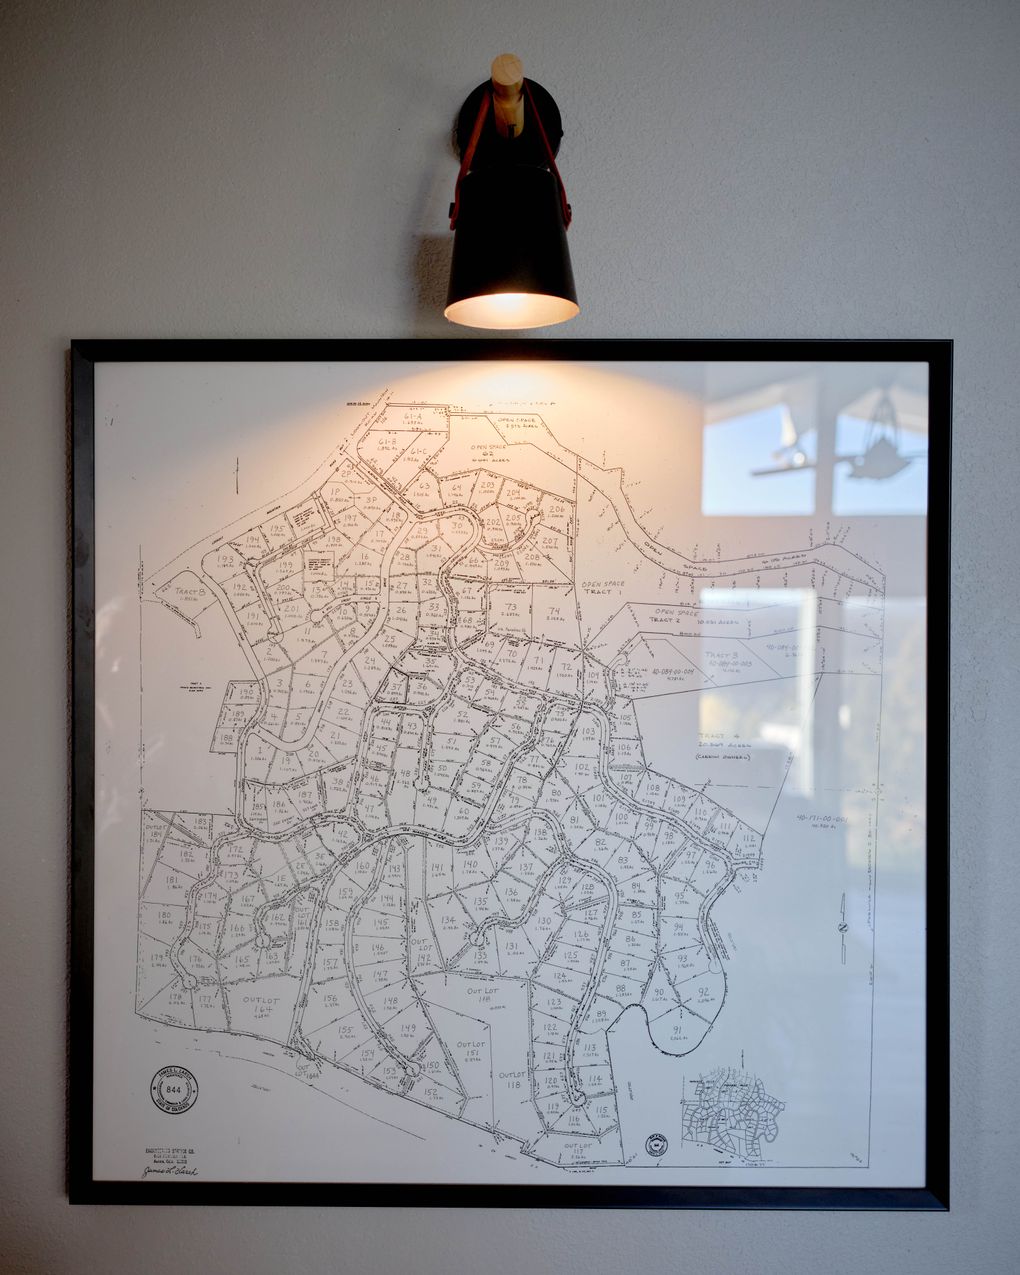 A map of Paradise Hills, showing the location of its 185 homes, hangs in Michele Lawrence’s house. She opposed the camera installation. (Photo by Stephen Speranza for The Washington Post)